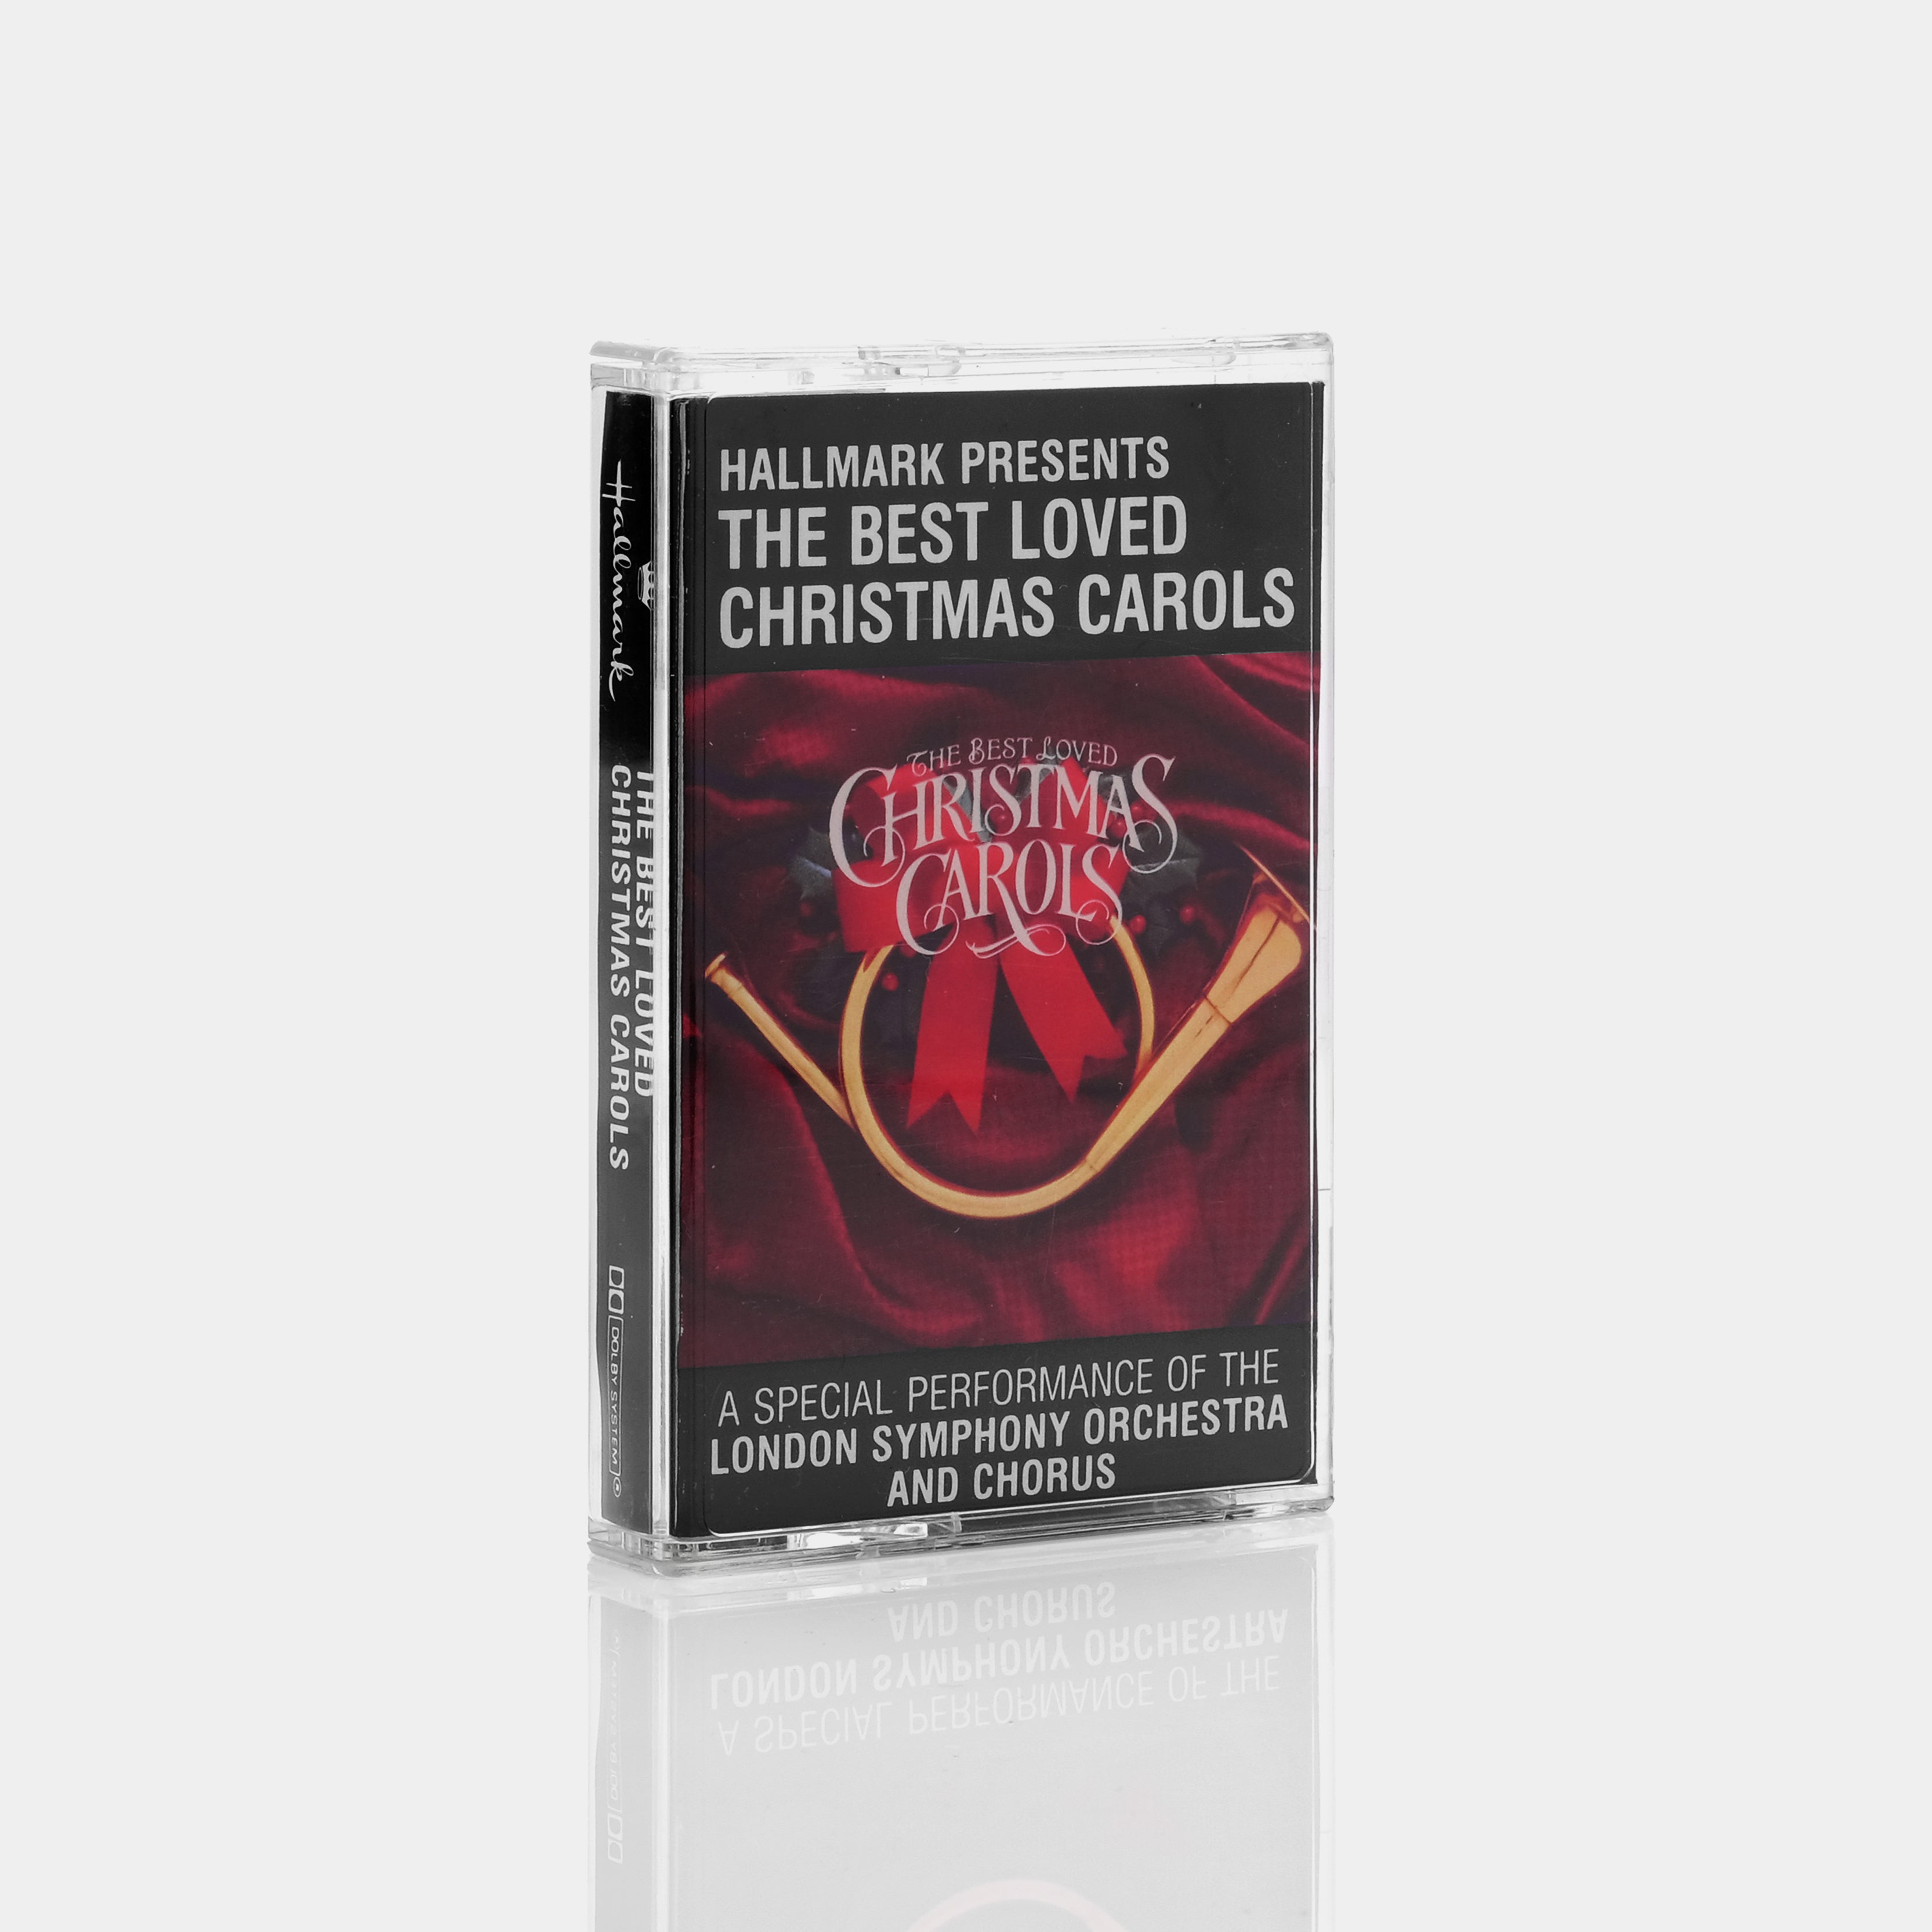 The London Symphony Orchestra And Chorus - The Best Loved Christmas Carols Cassette Tape